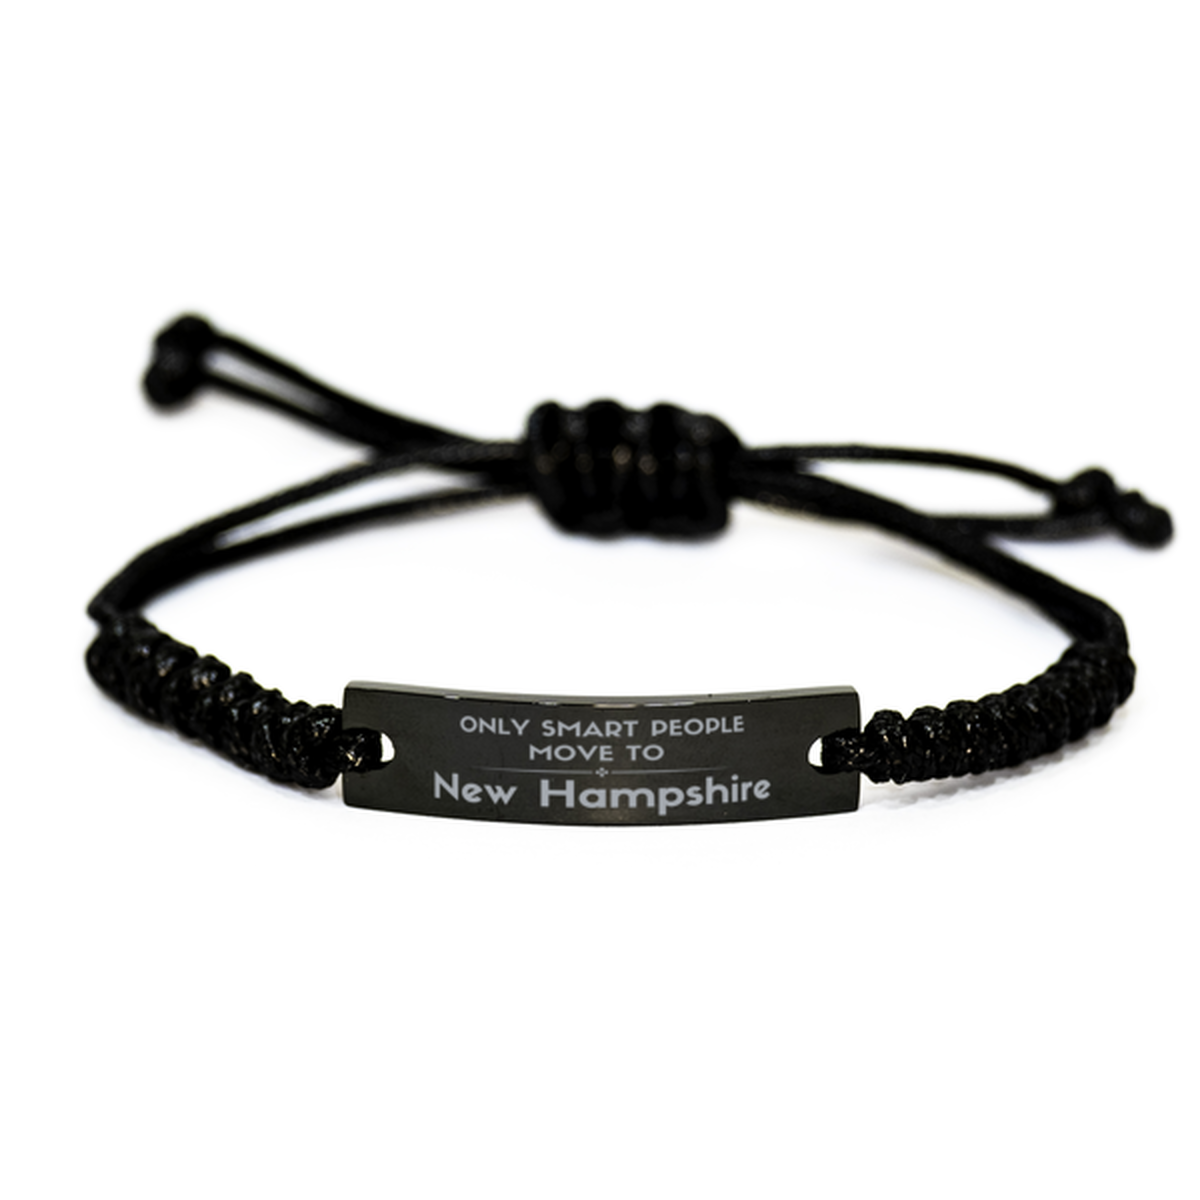 Only smart people move to New Hampshire Black Rope Bracelet, Gag Gifts For New Hampshire, Move to New Hampshire Gifts for Friends Coworker Funny Saying Quote